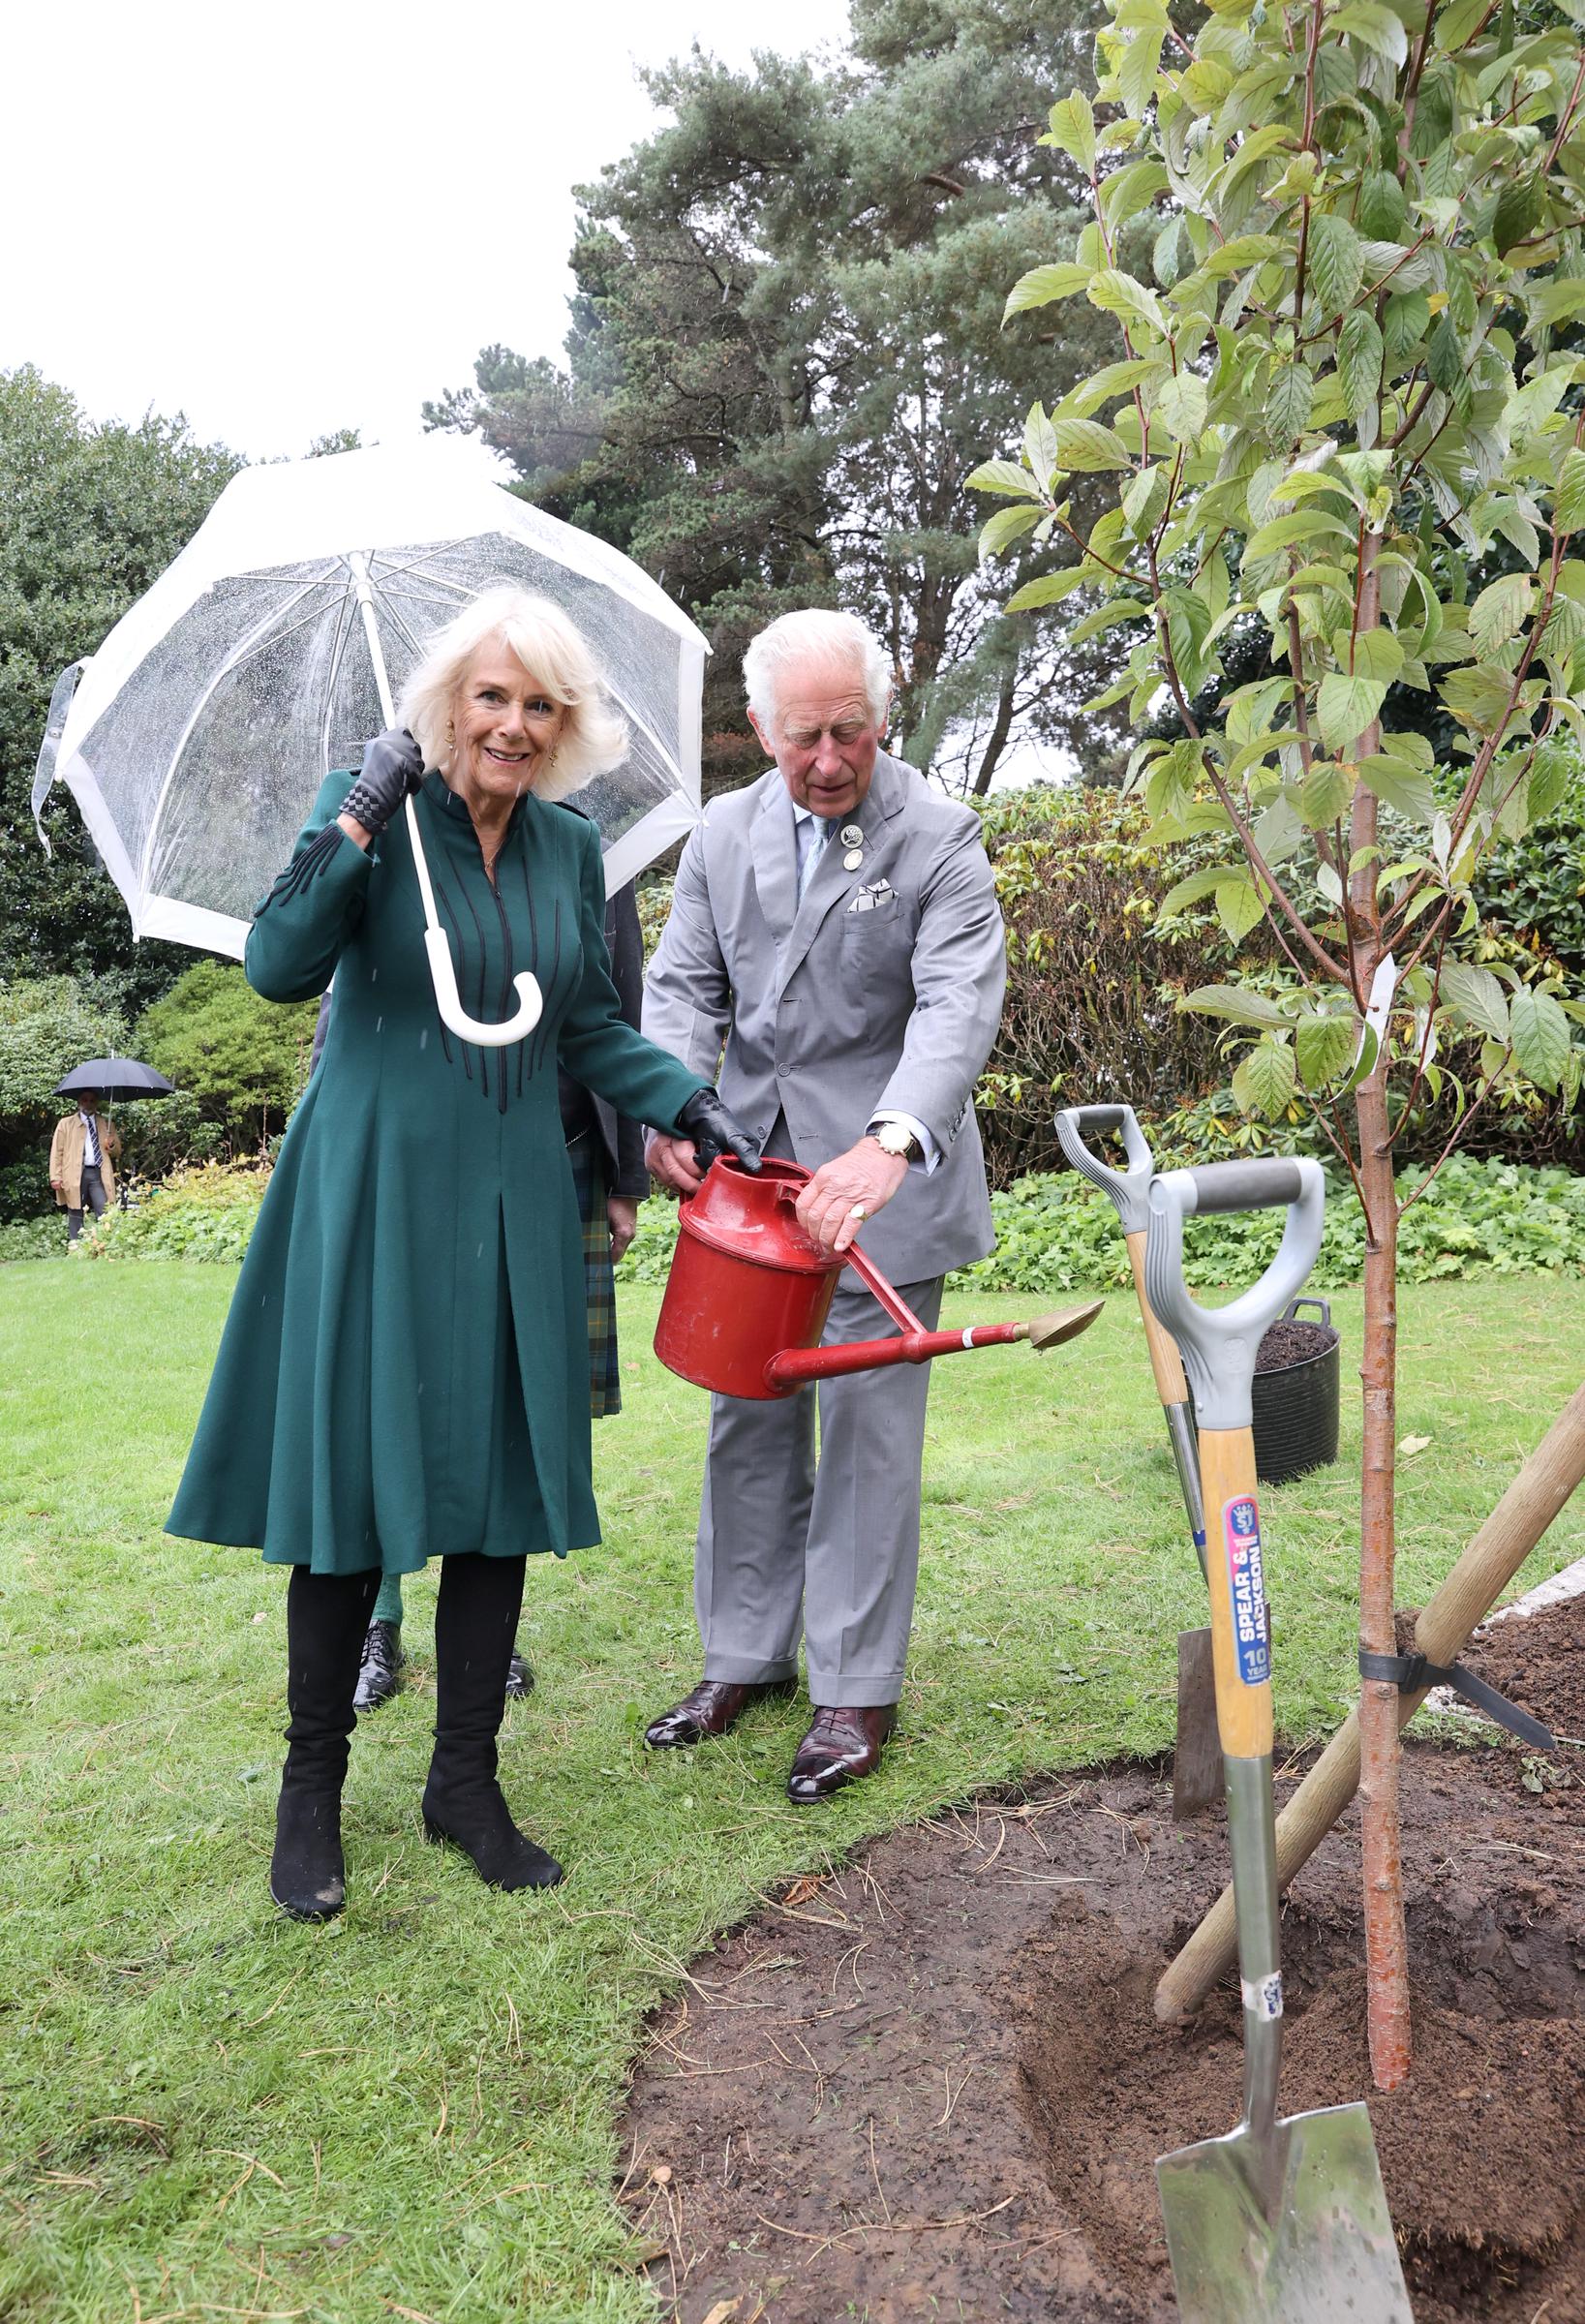 Queen Camilla and King Charles III planted a tree at the Royal Botanic Garden Edinburgh in Edinburgh, Scotland, to celebrate its 350th anniversary on October 1, 2021. | Source: Getty Images